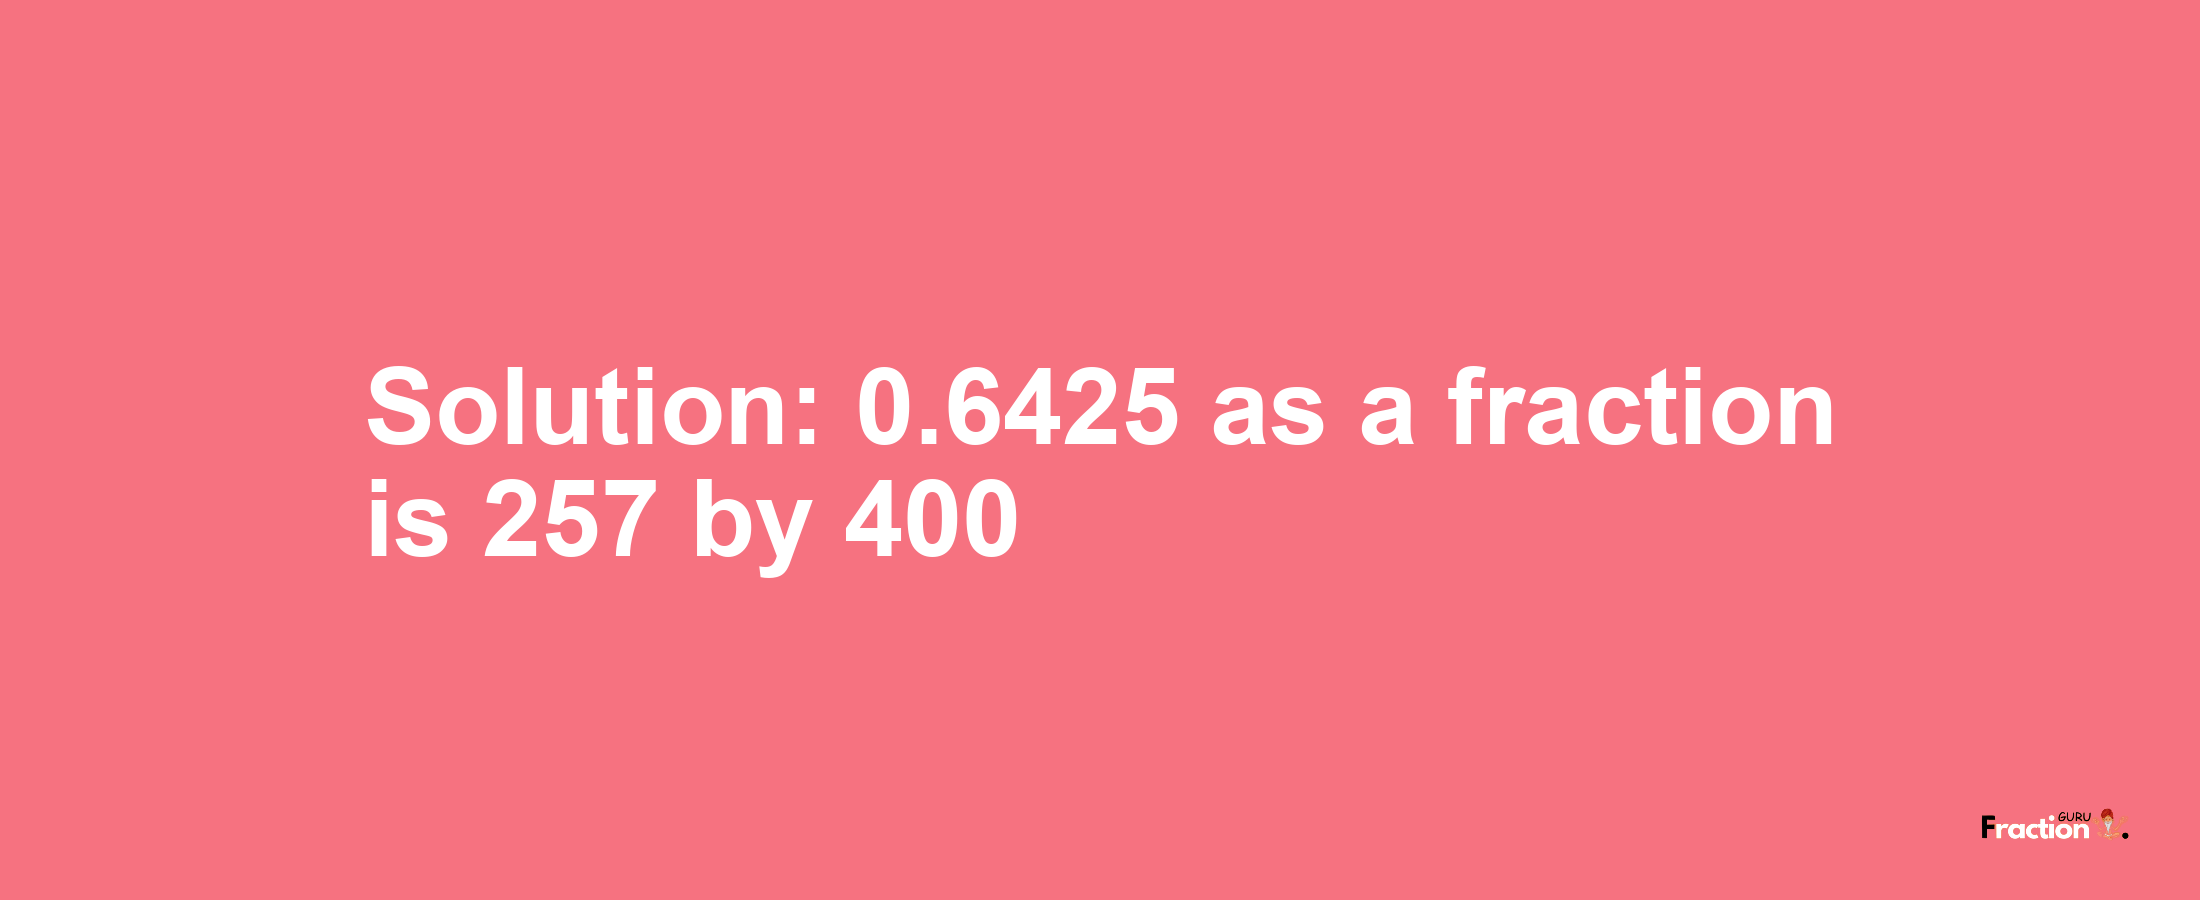 Solution:0.6425 as a fraction is 257/400